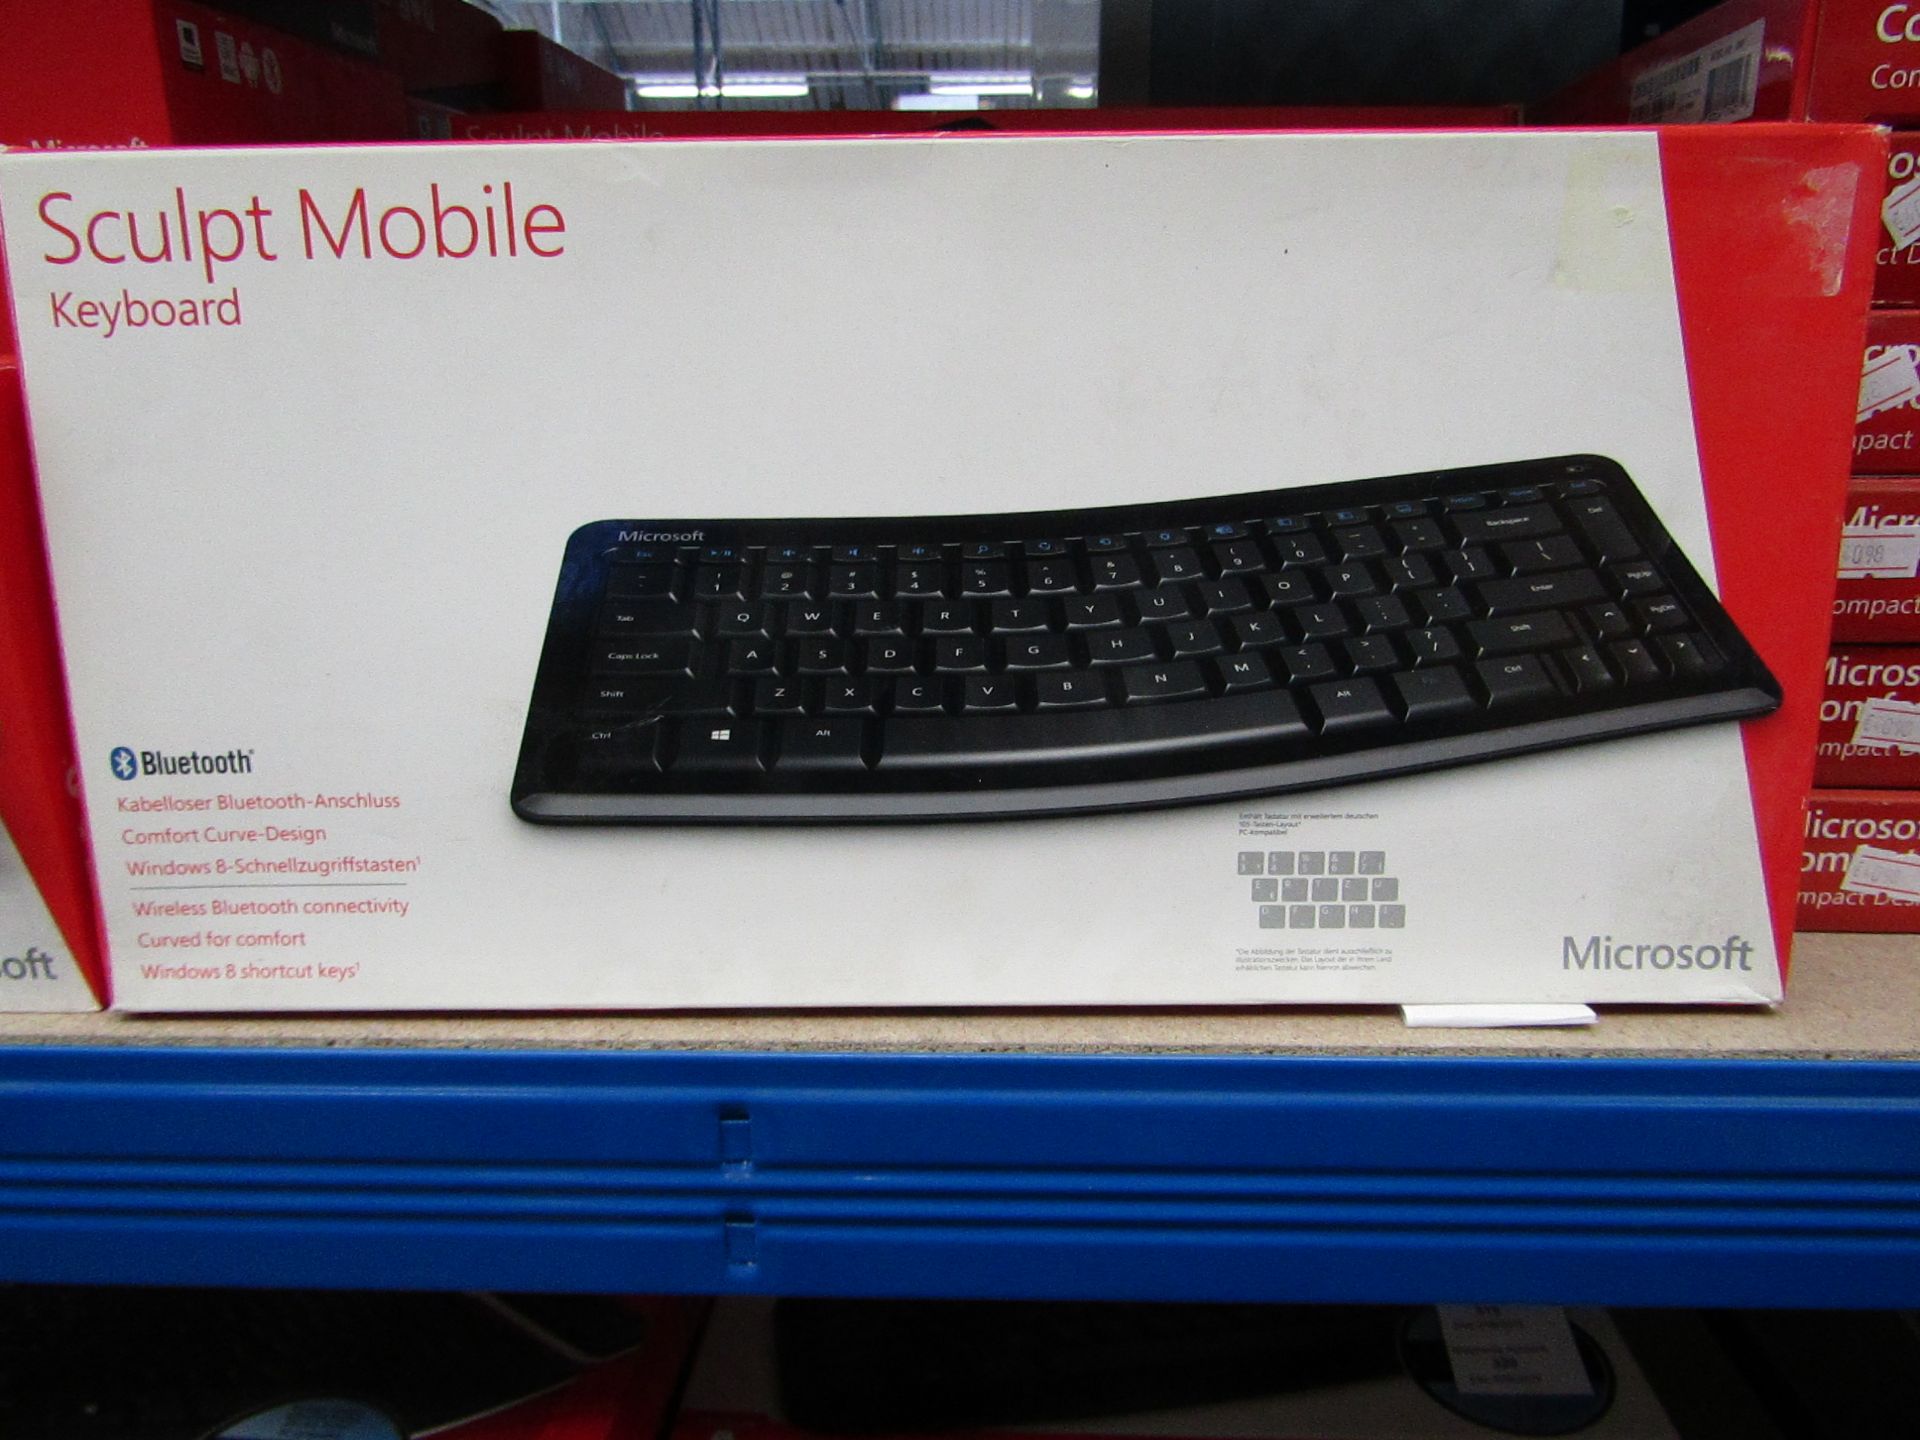 Microsoft Sculpt Mobile keyboard, tested working and boxed.